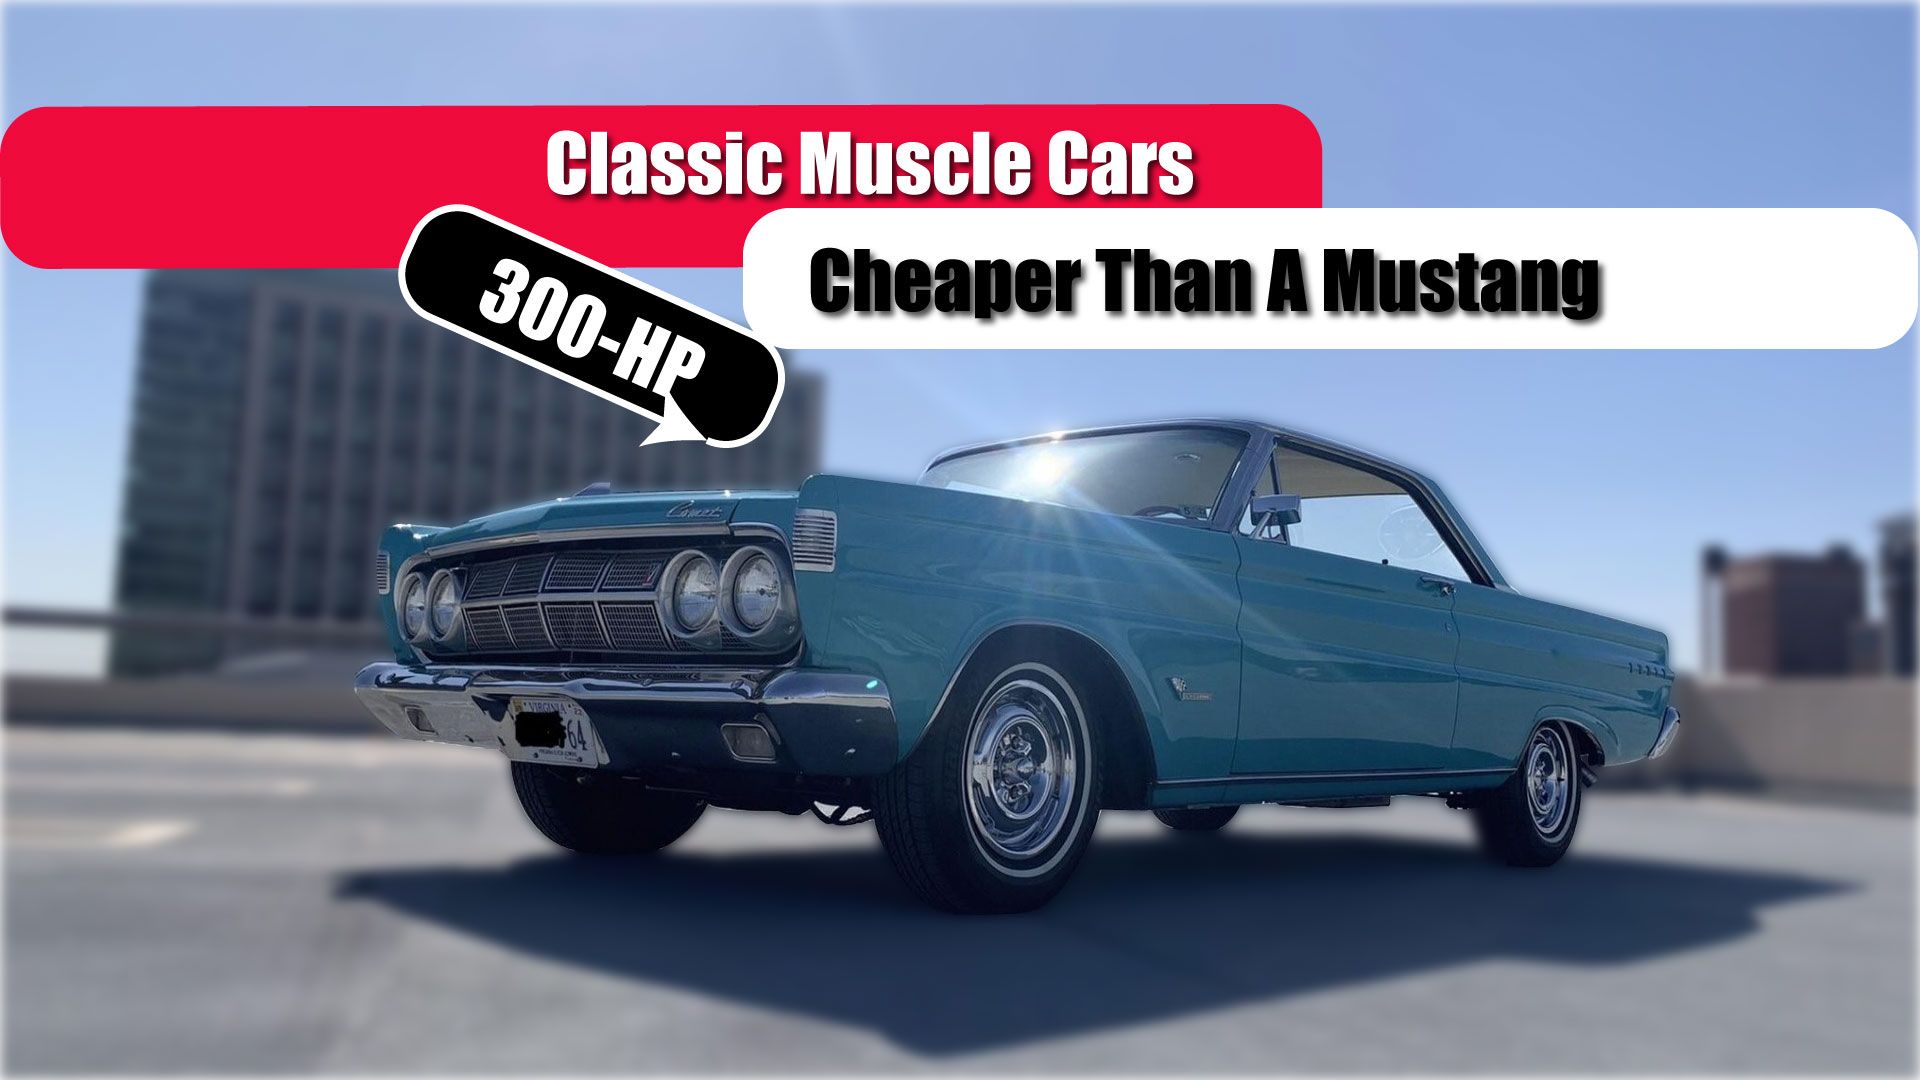 Cheap Classic Muscle Car featured image